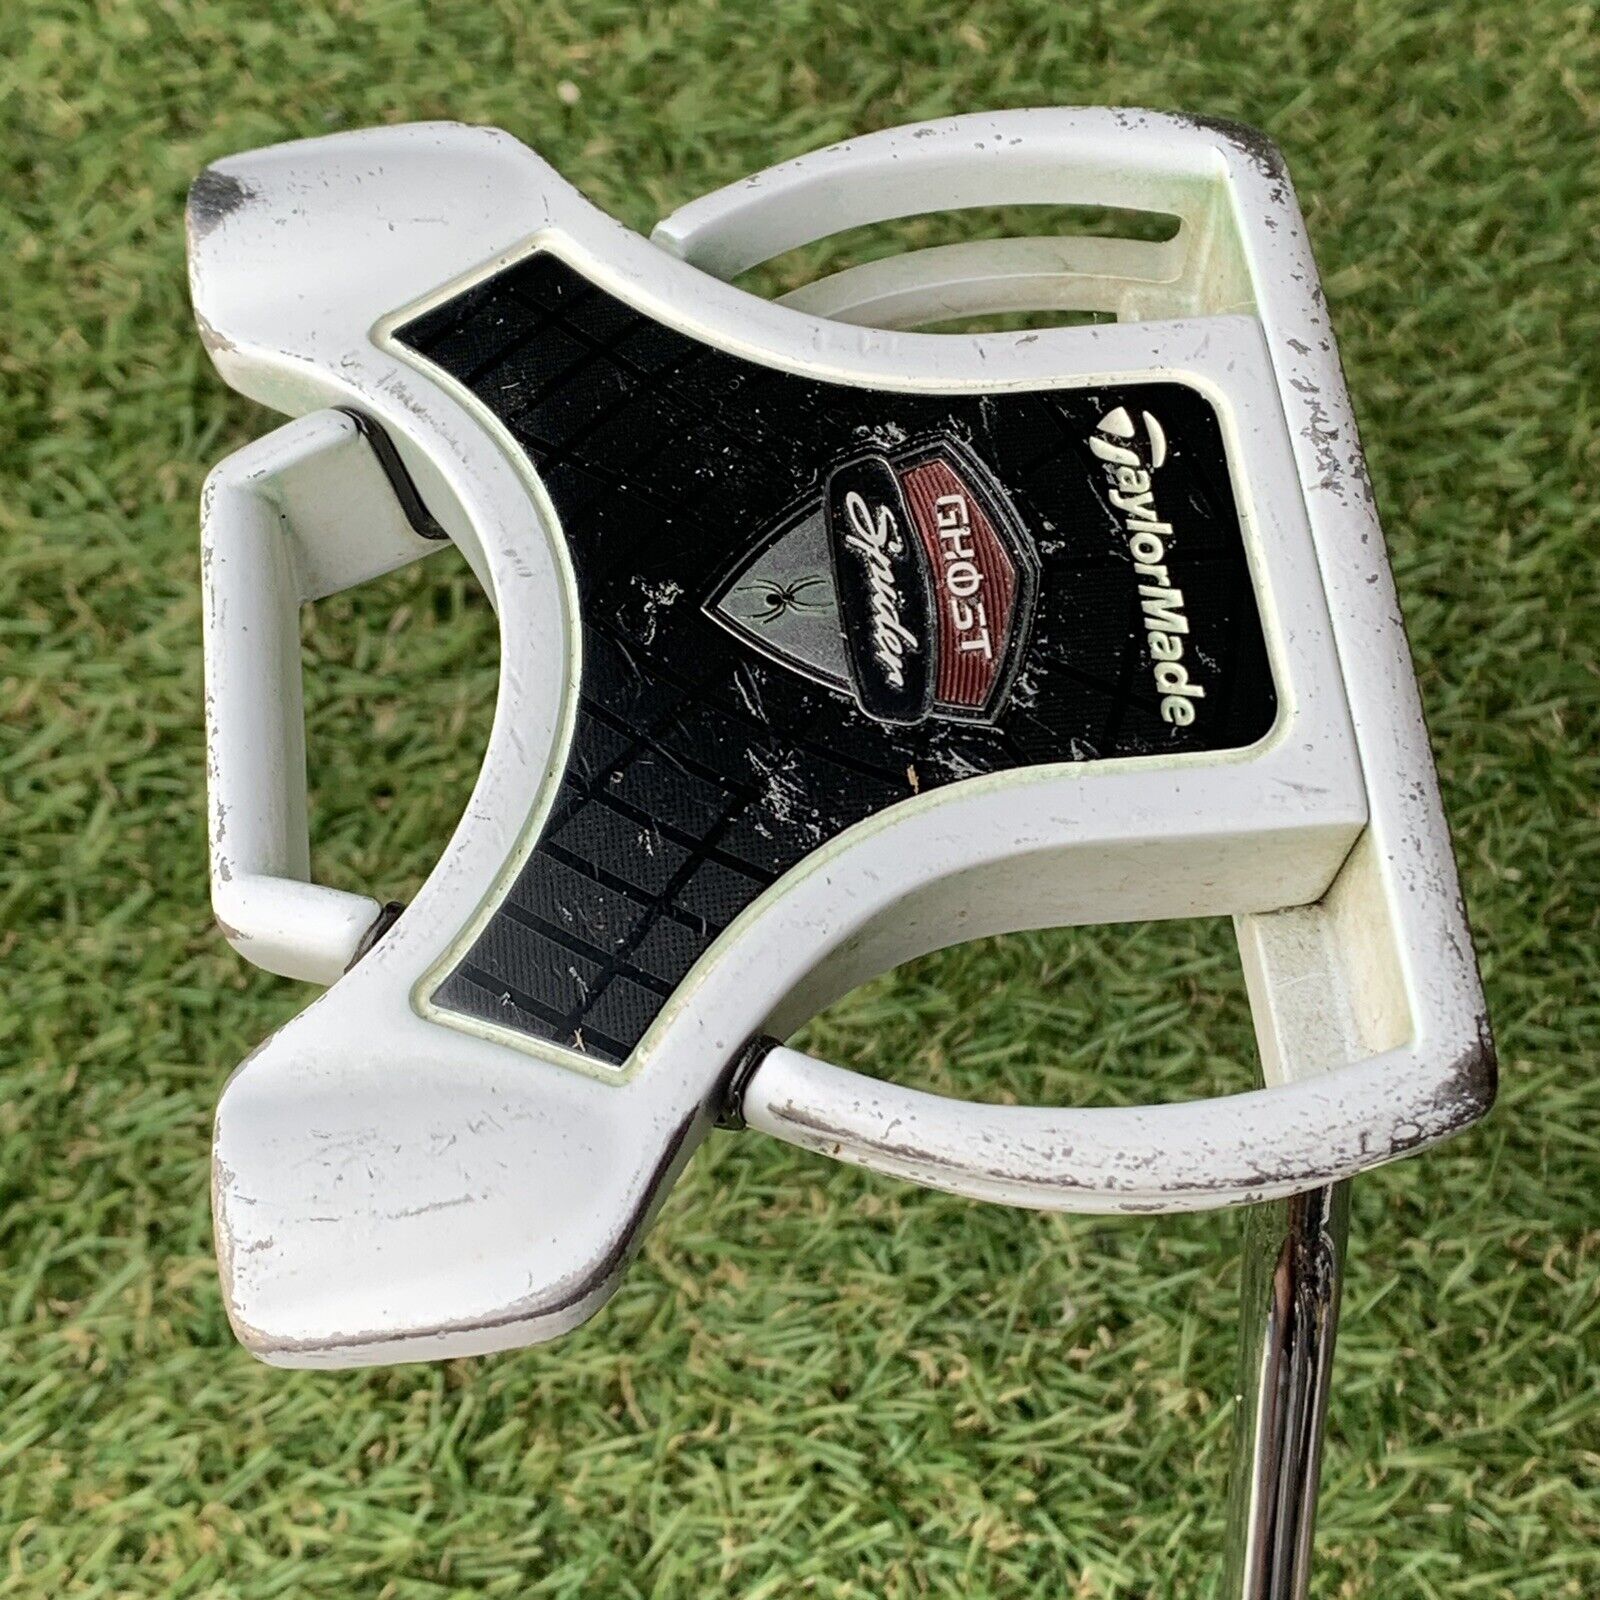 Taylormade ghost spider putter 33”